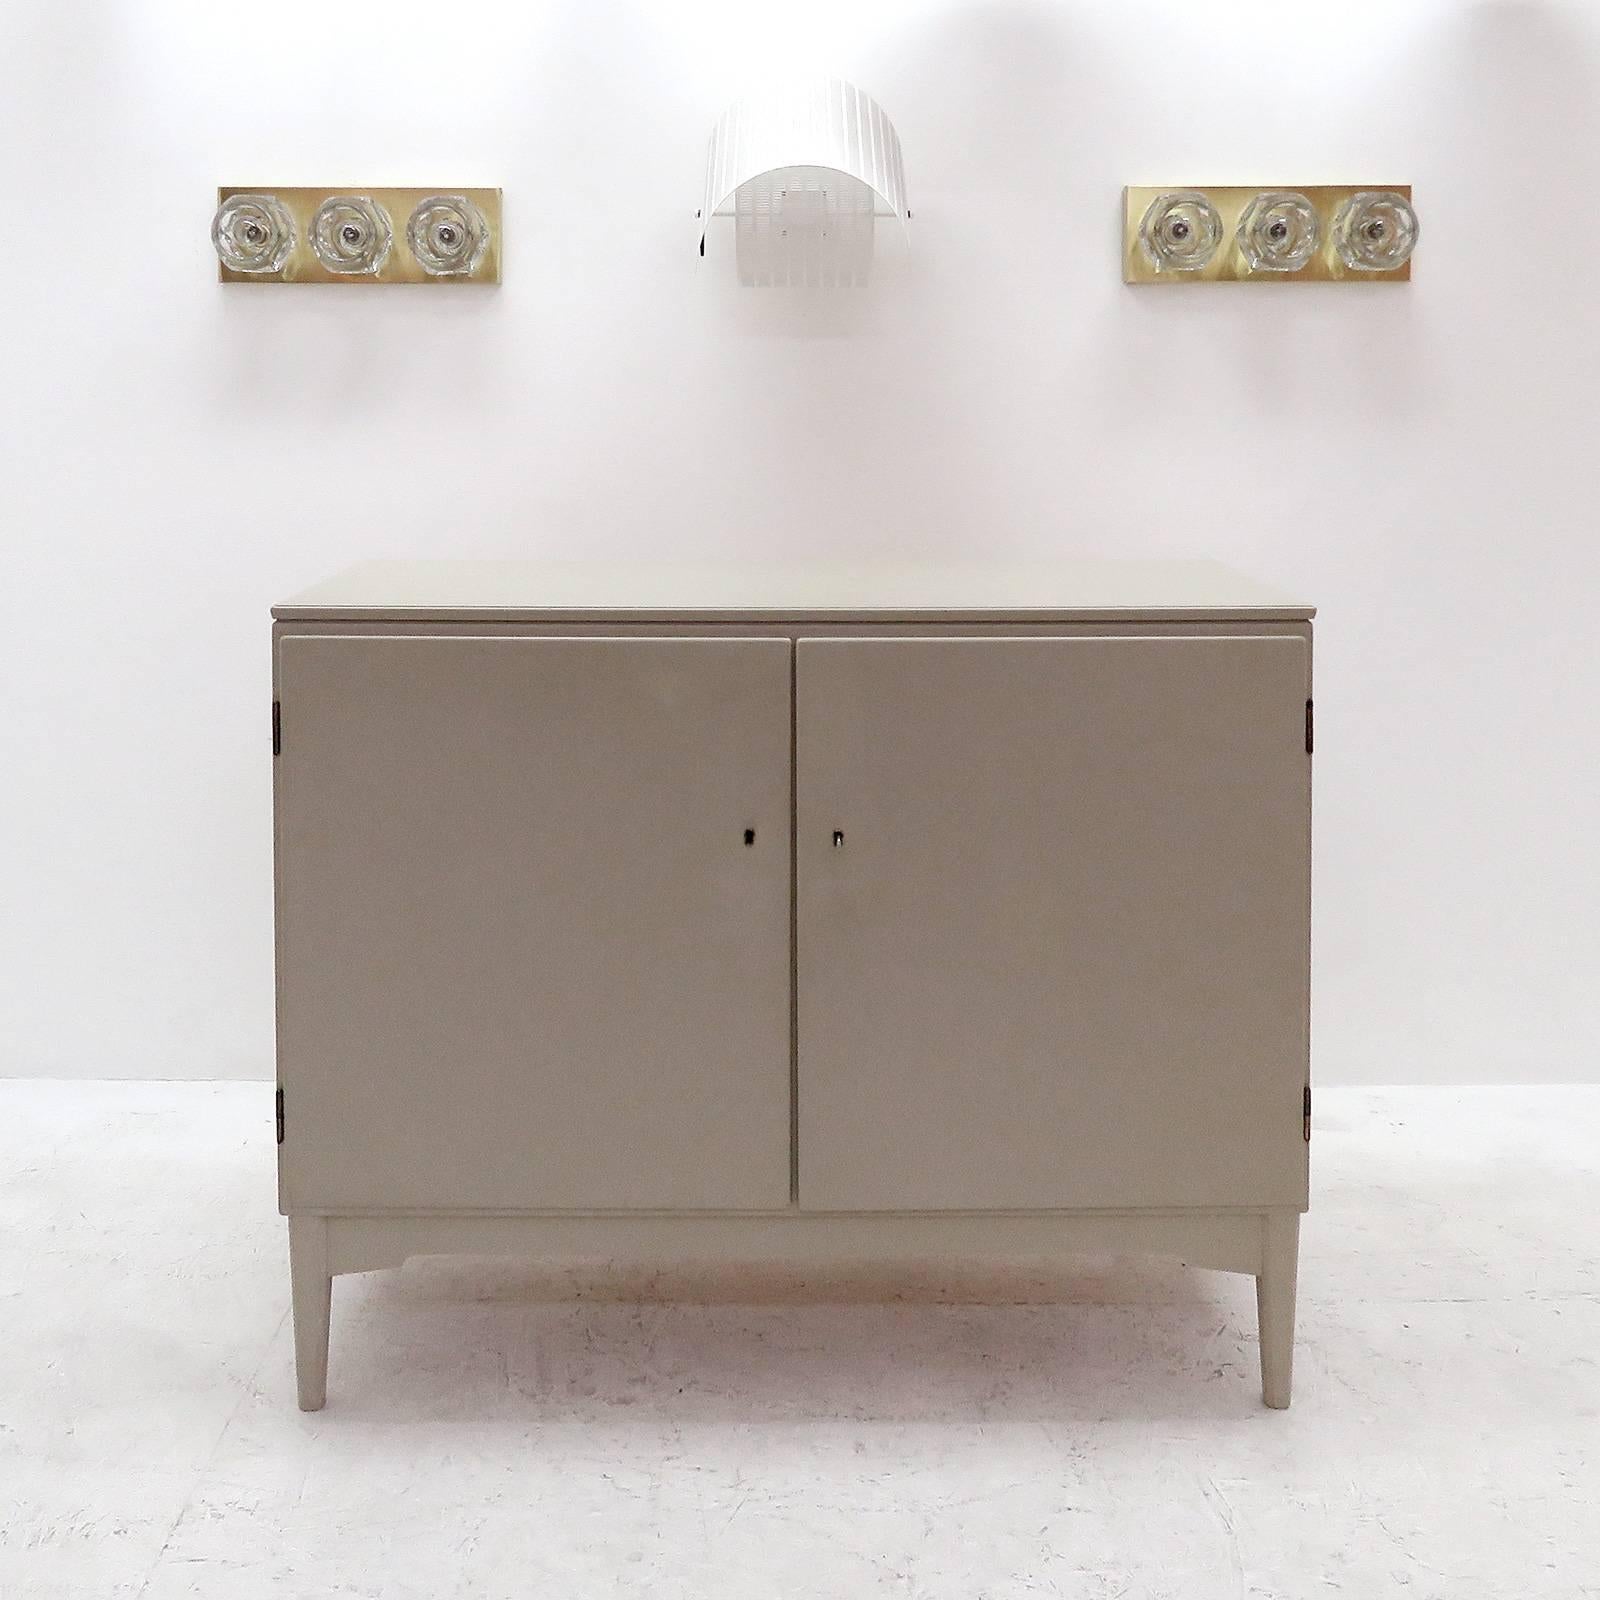 Minimal 1940s Swedish sideboard, painted in light grey with two doors and four drawers on one side and two shelves on the other side, key present.